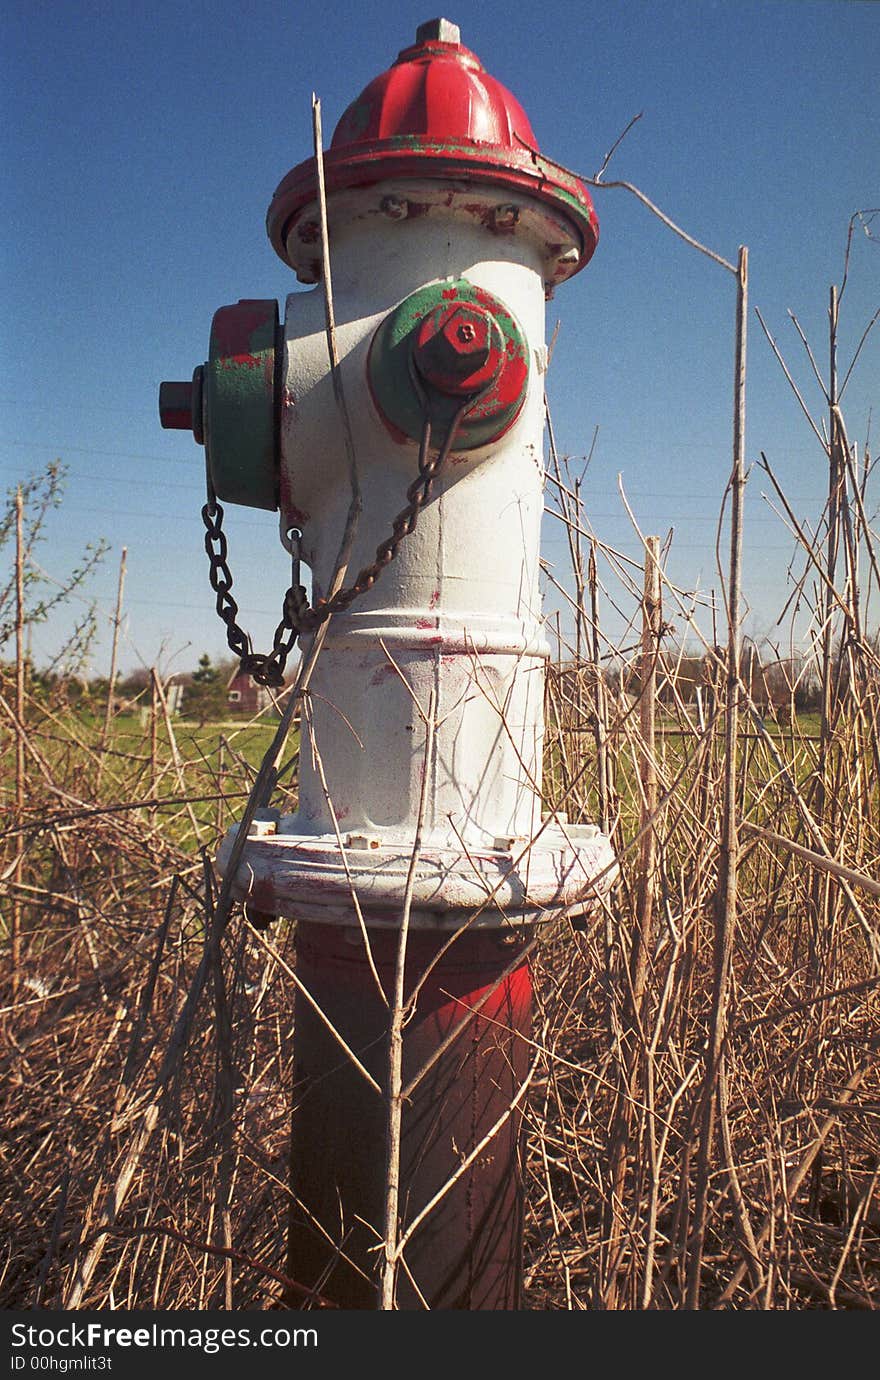 A single lone fire hydrant setting in an open field next to an area of new residential construction